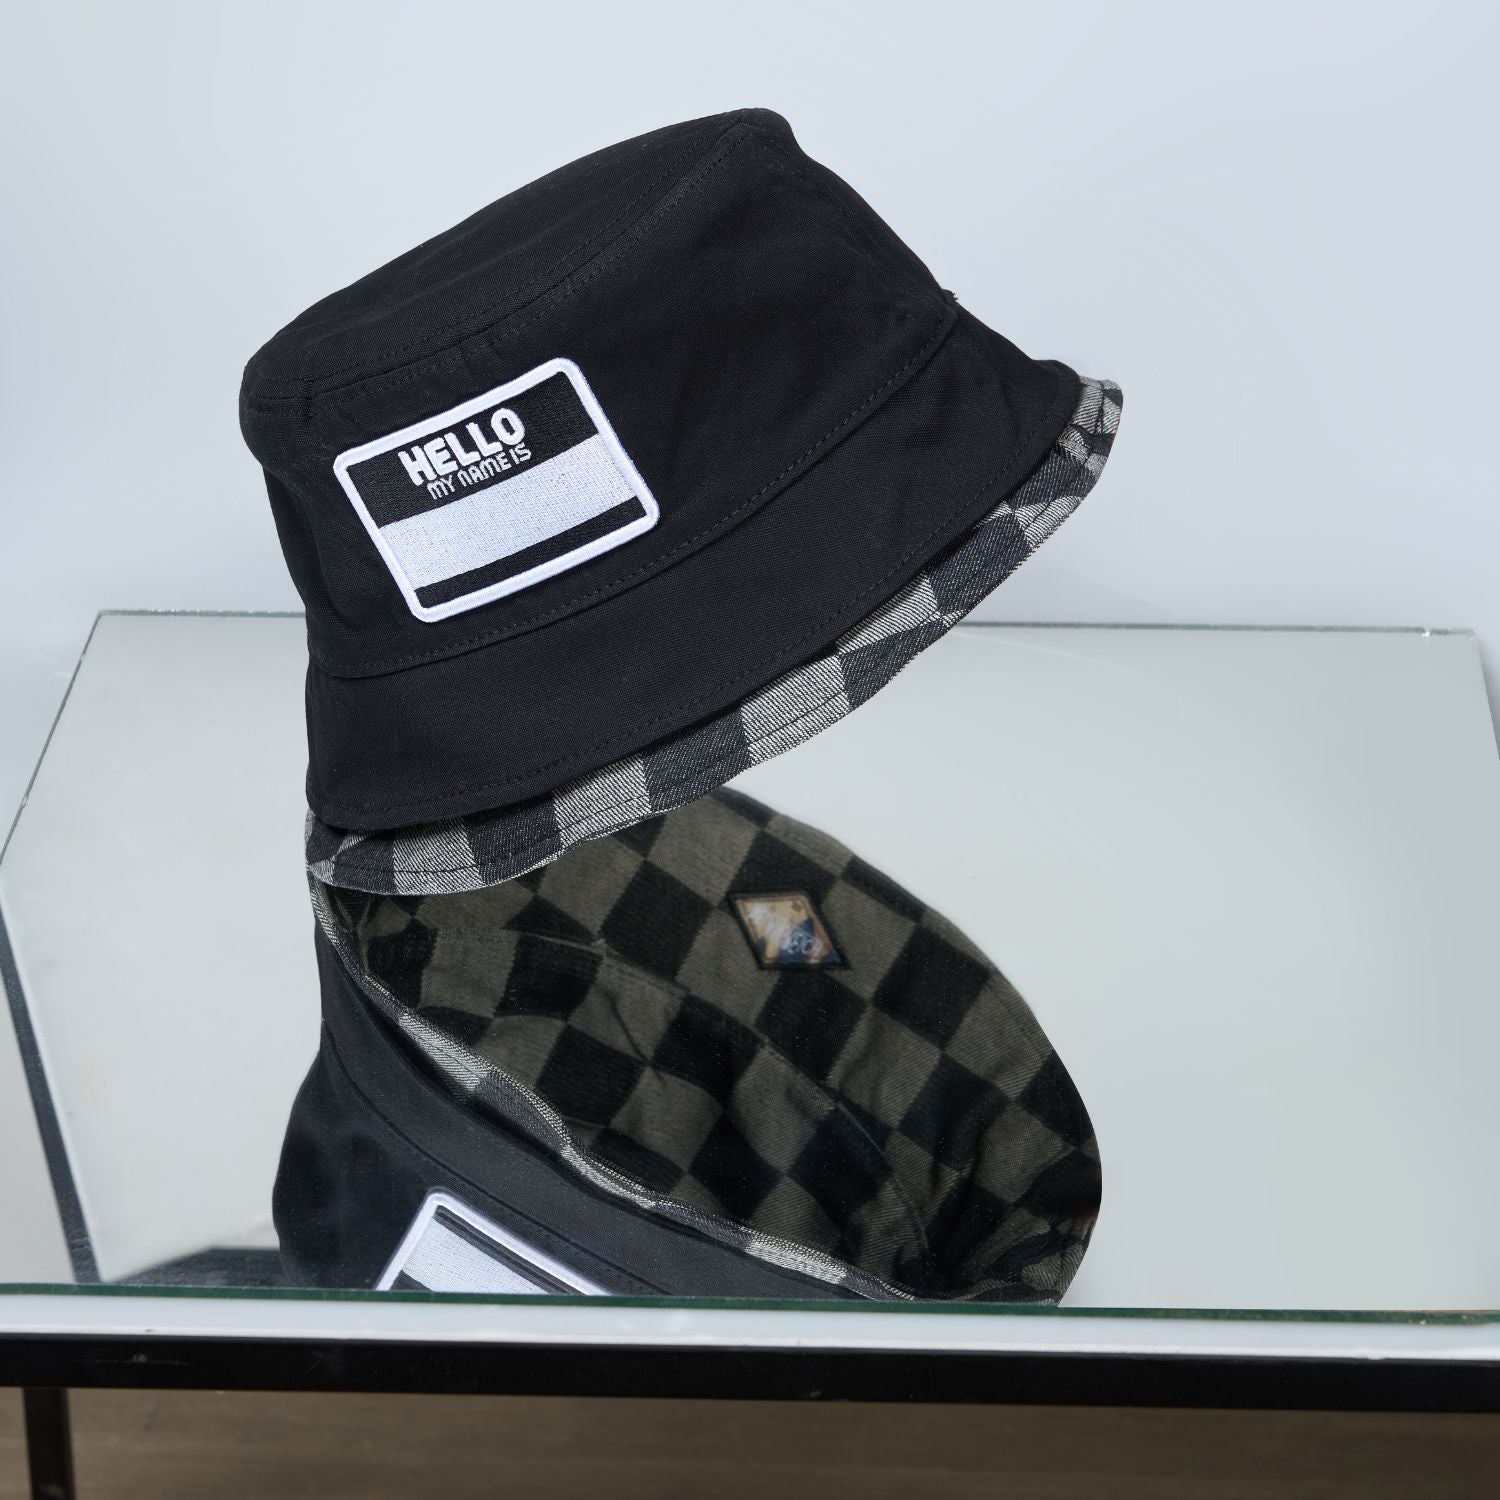 Black colored, chequered pattern, bucket hat for men